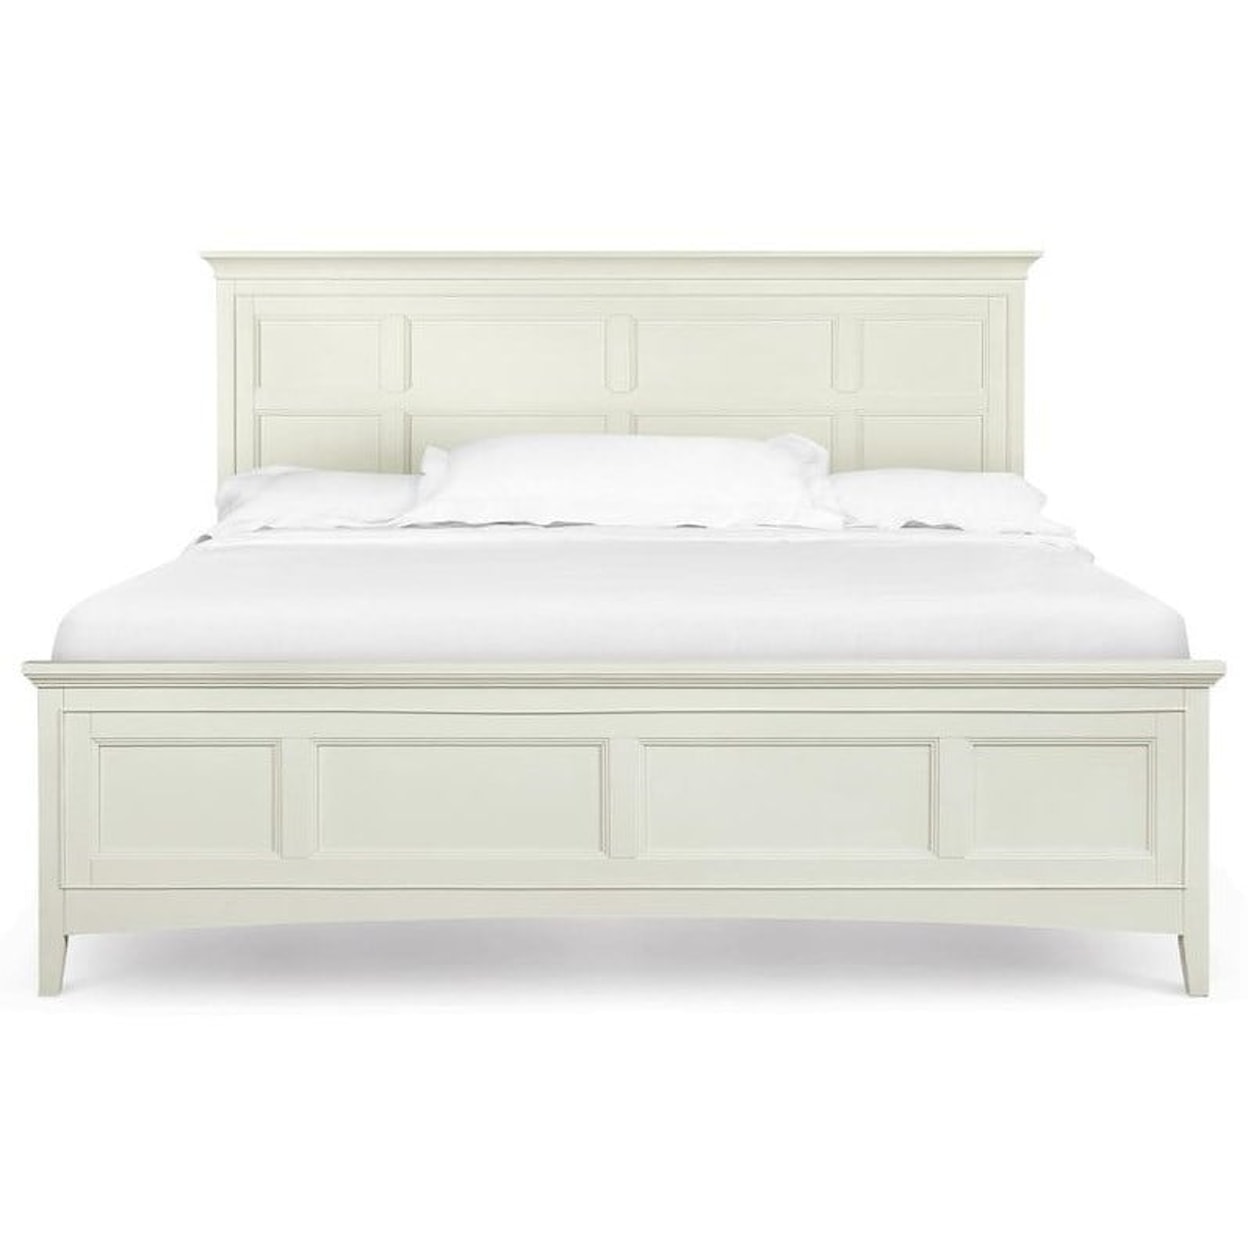 Magnussen Home Kentwood Bedroom California King Panel Bed with Storage Rails